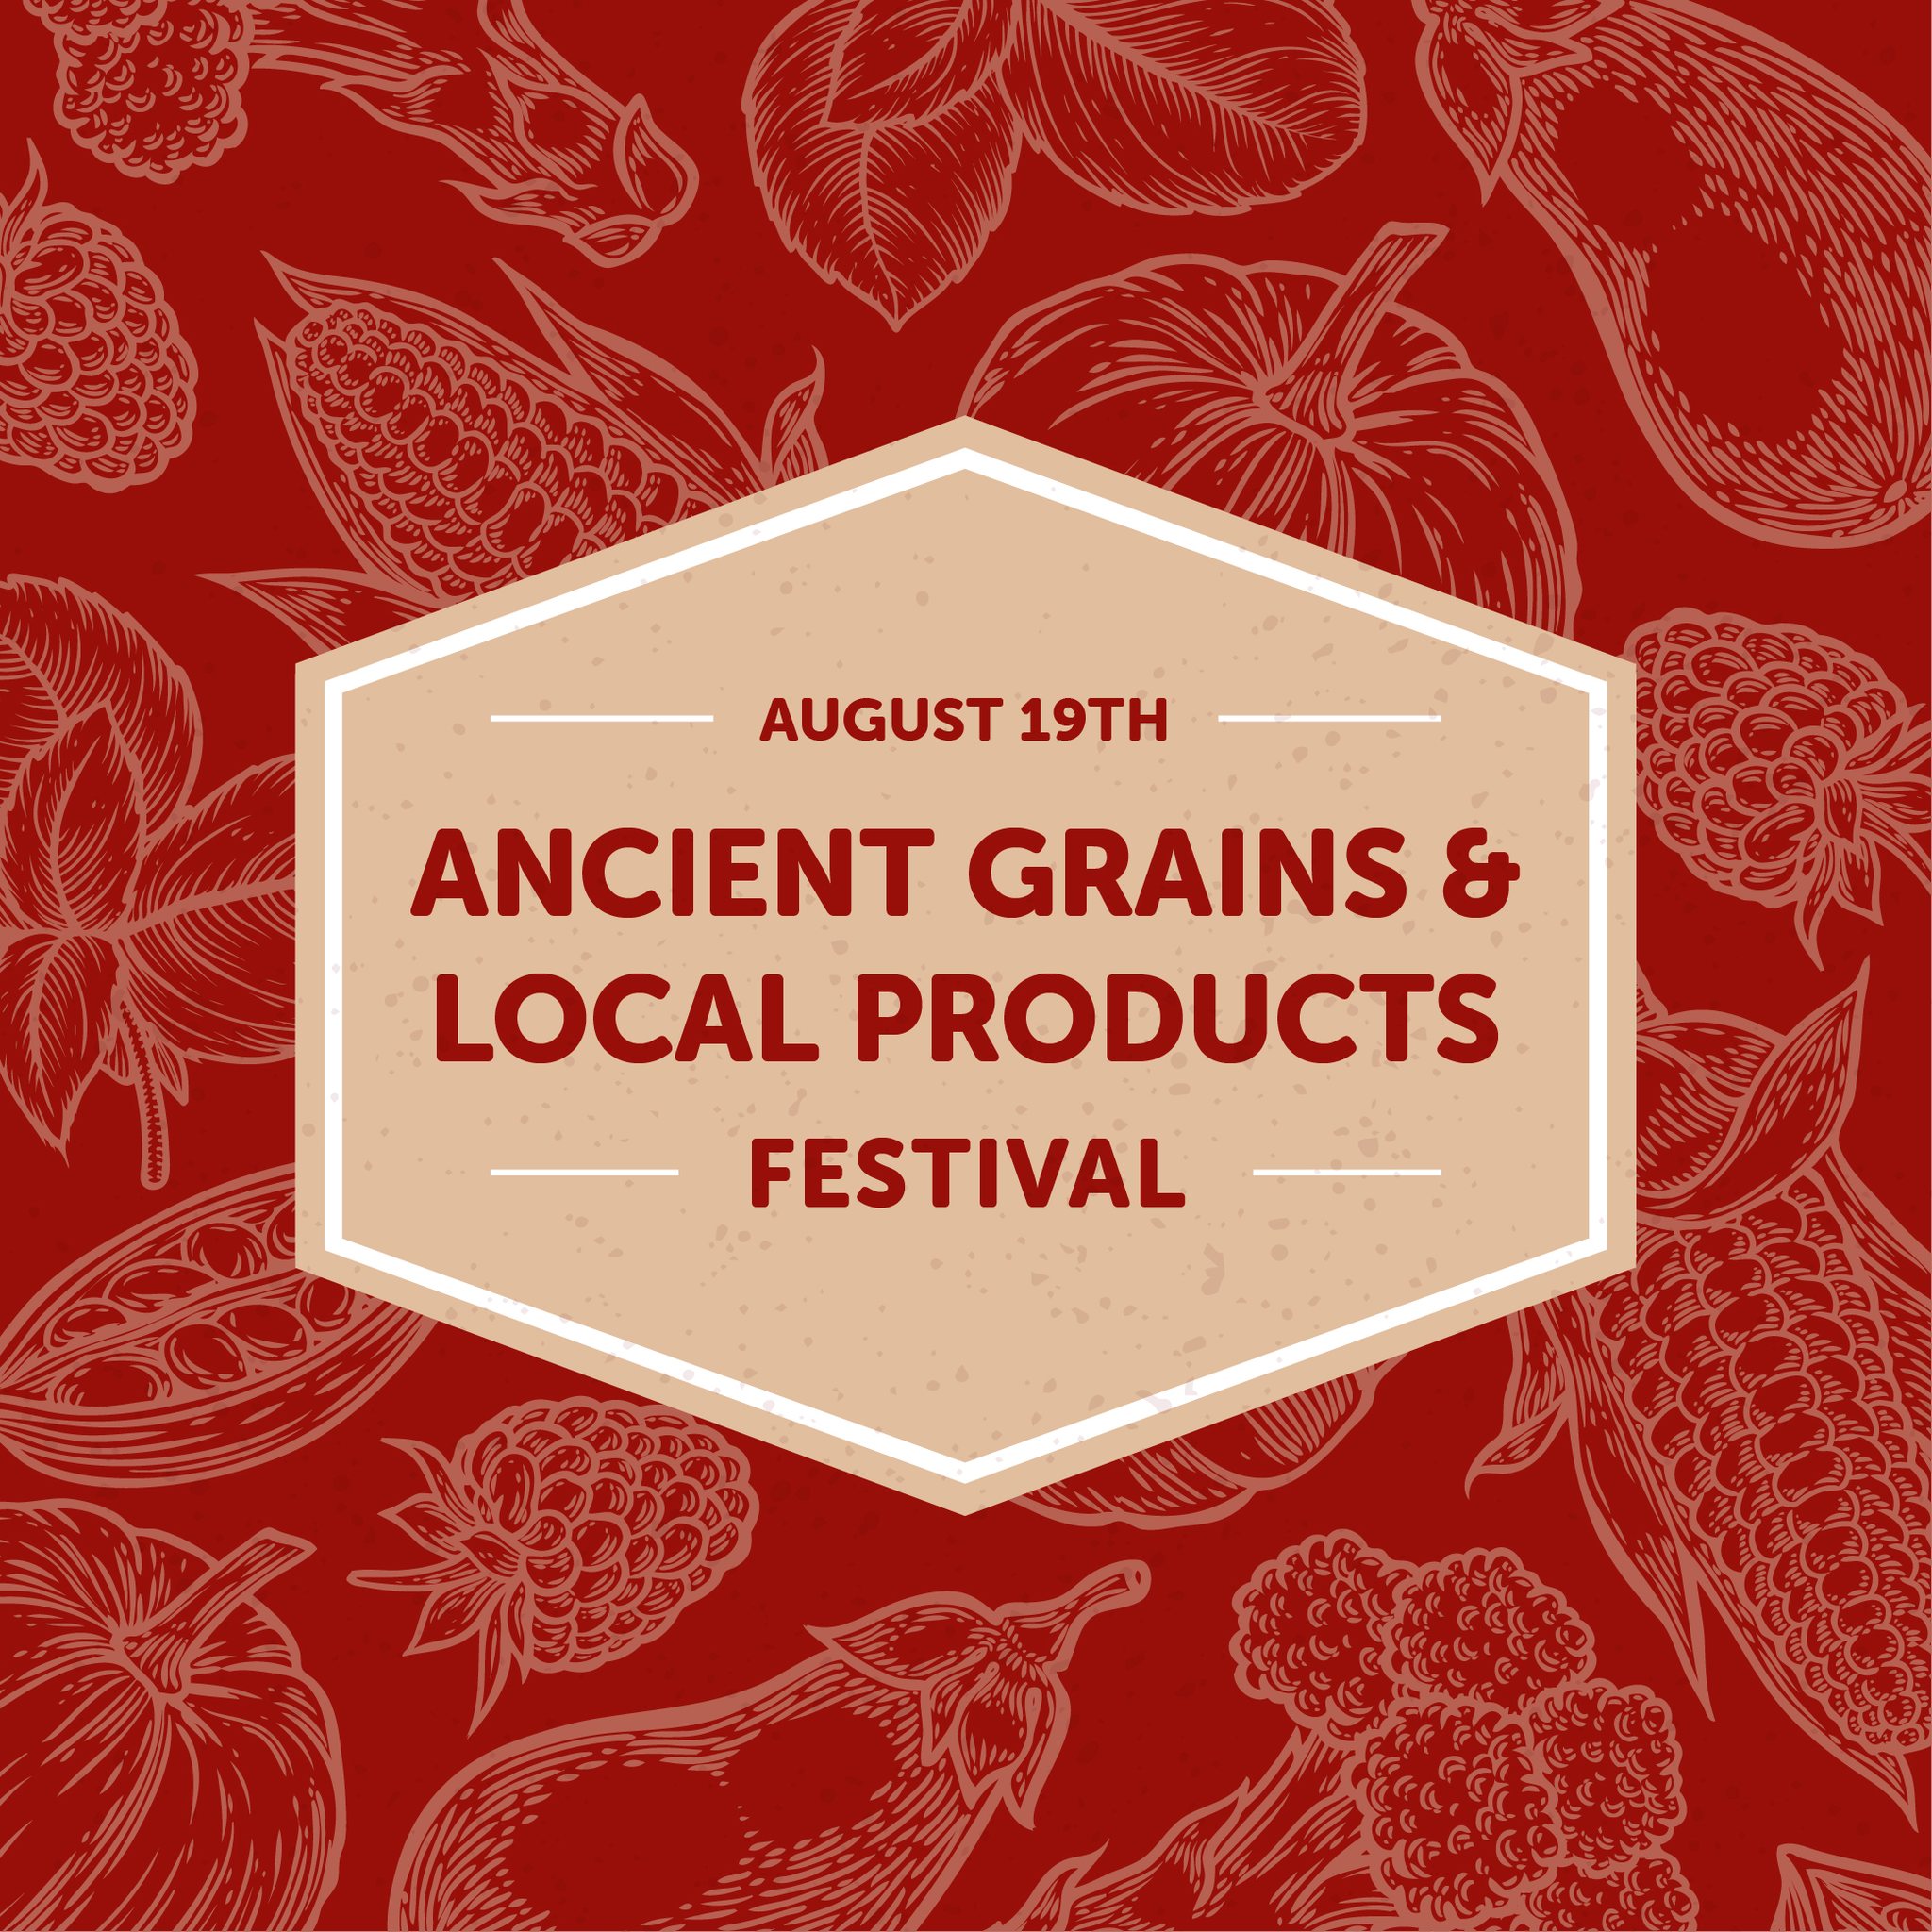 Ancient grains local products festival